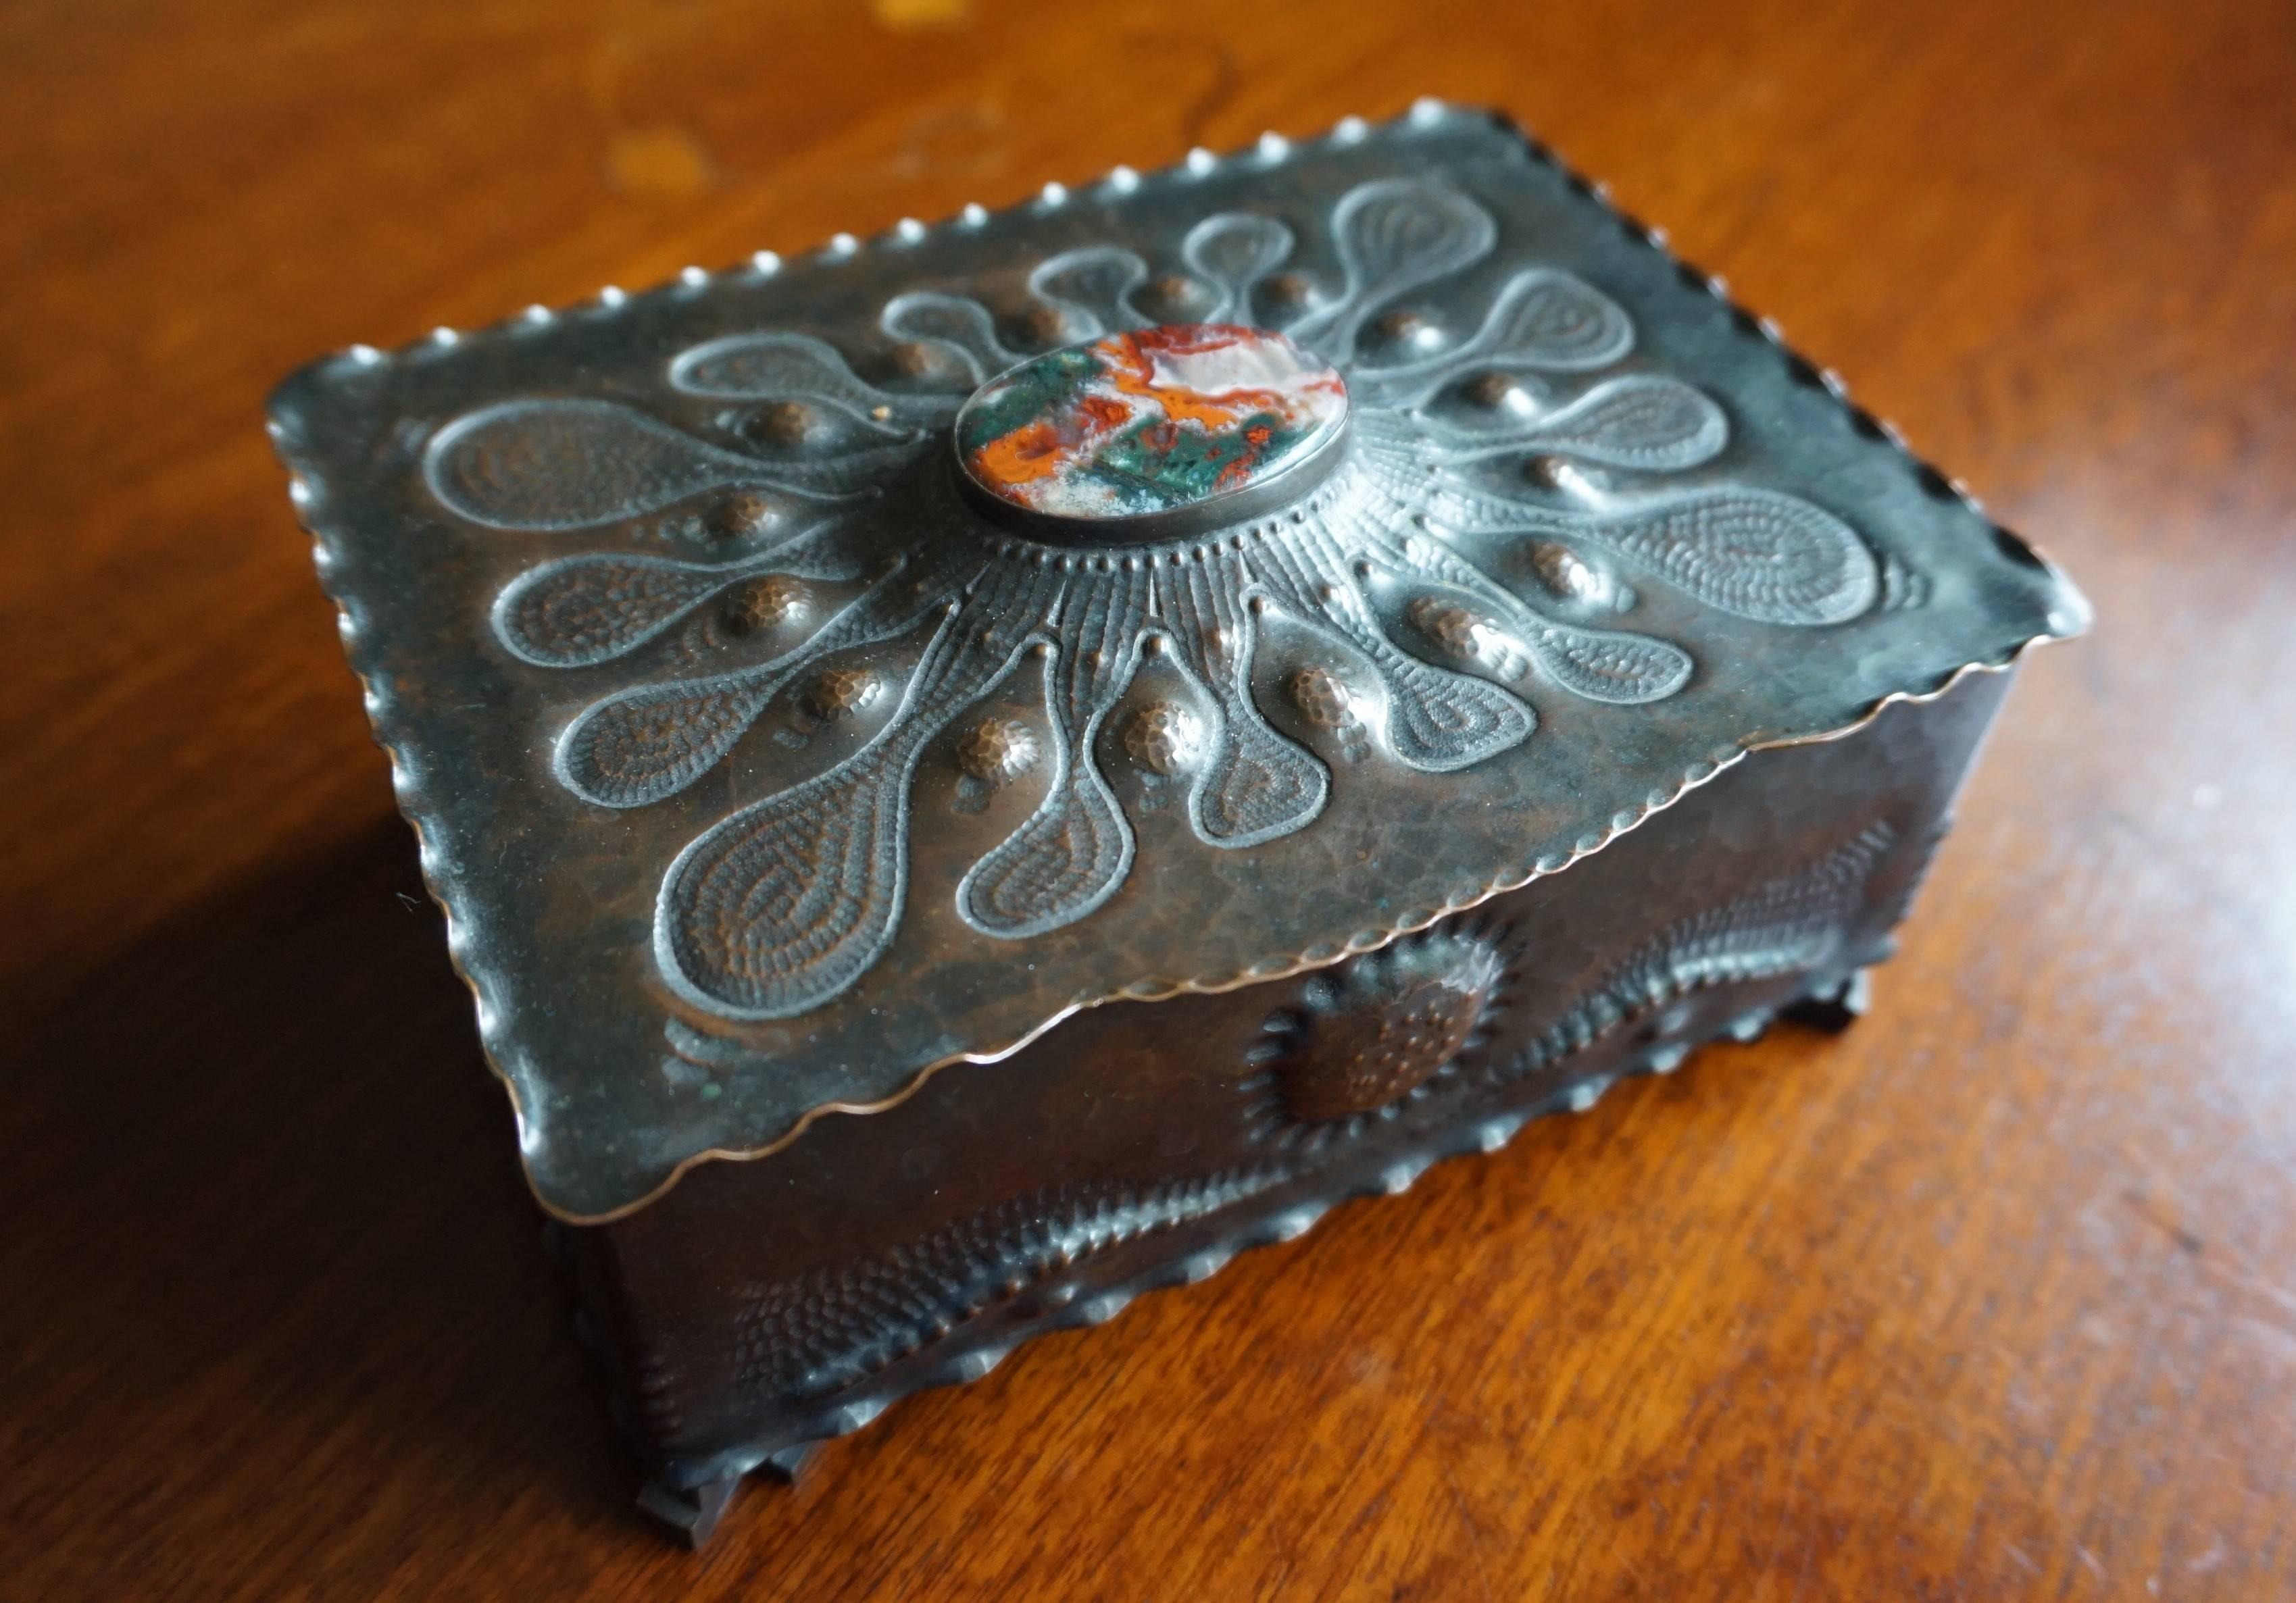 Stunning little Arts & Crafts box.

This undoubtedly is one of the best handcrafted Arts & Crafts boxes we ever had the pleasure of offering. The design is to die for and the artist who crafted this box must have been top class, because the patterns